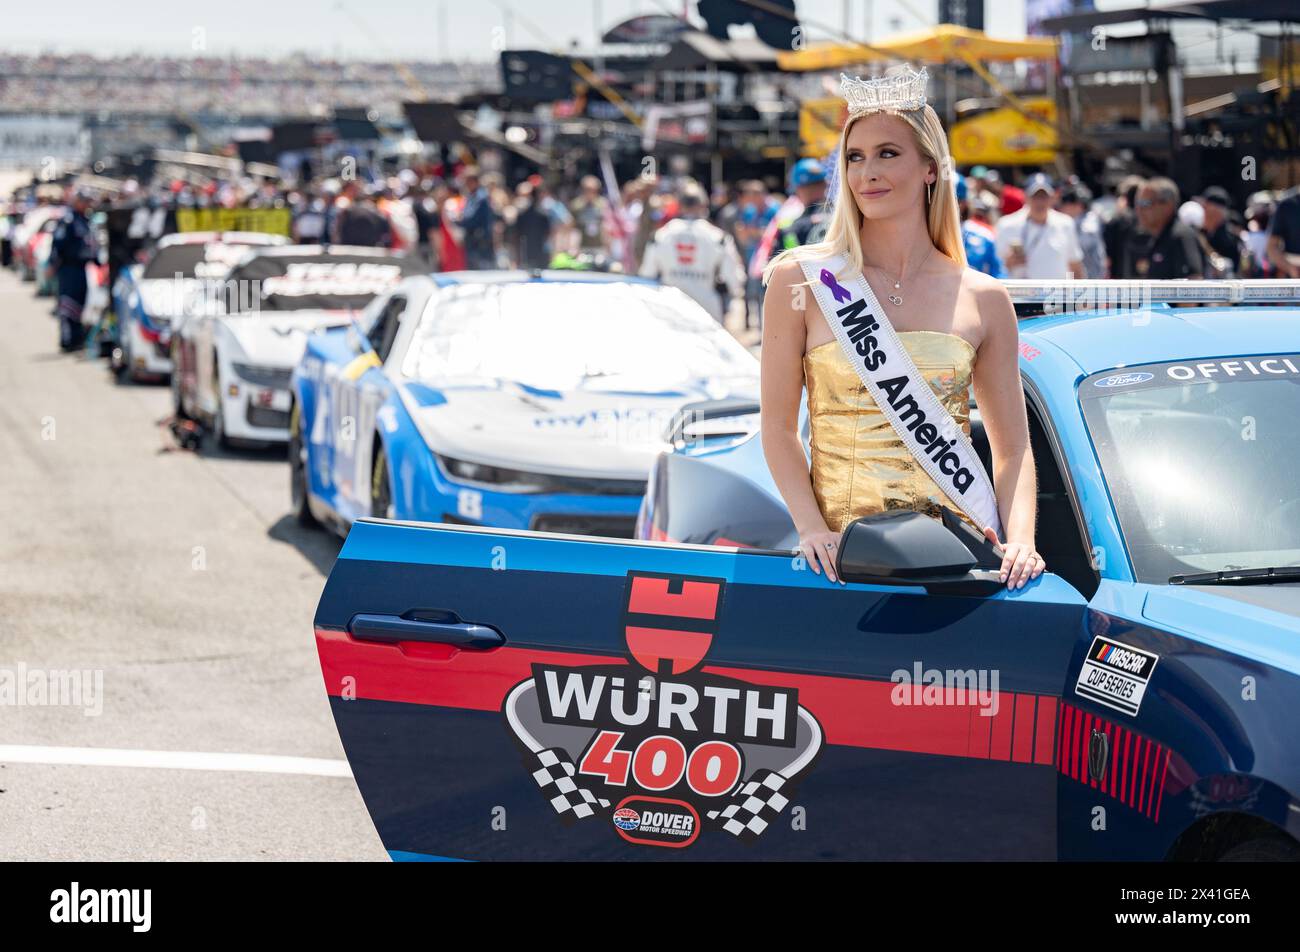 Dover, United States Of America. 28th Apr, 2024. Dover, United States of America. 28 April, 2024. U.S Air Force 2nd Lt. Madison Marsh, Miss America 2024, poses before climbing into the Official Pace Car for the Würth 400 NASCAR at the Dover Motor Speedway, April 28, 2024 in Dover, Delaware. Marsh, a 22-year-old U.S. Air Force Academy graduate is the first active duty military officer to hold the crown as Miss America. Credit: Miriam Thurber/U.S Air Force Photo/Alamy Live News Stock Photo